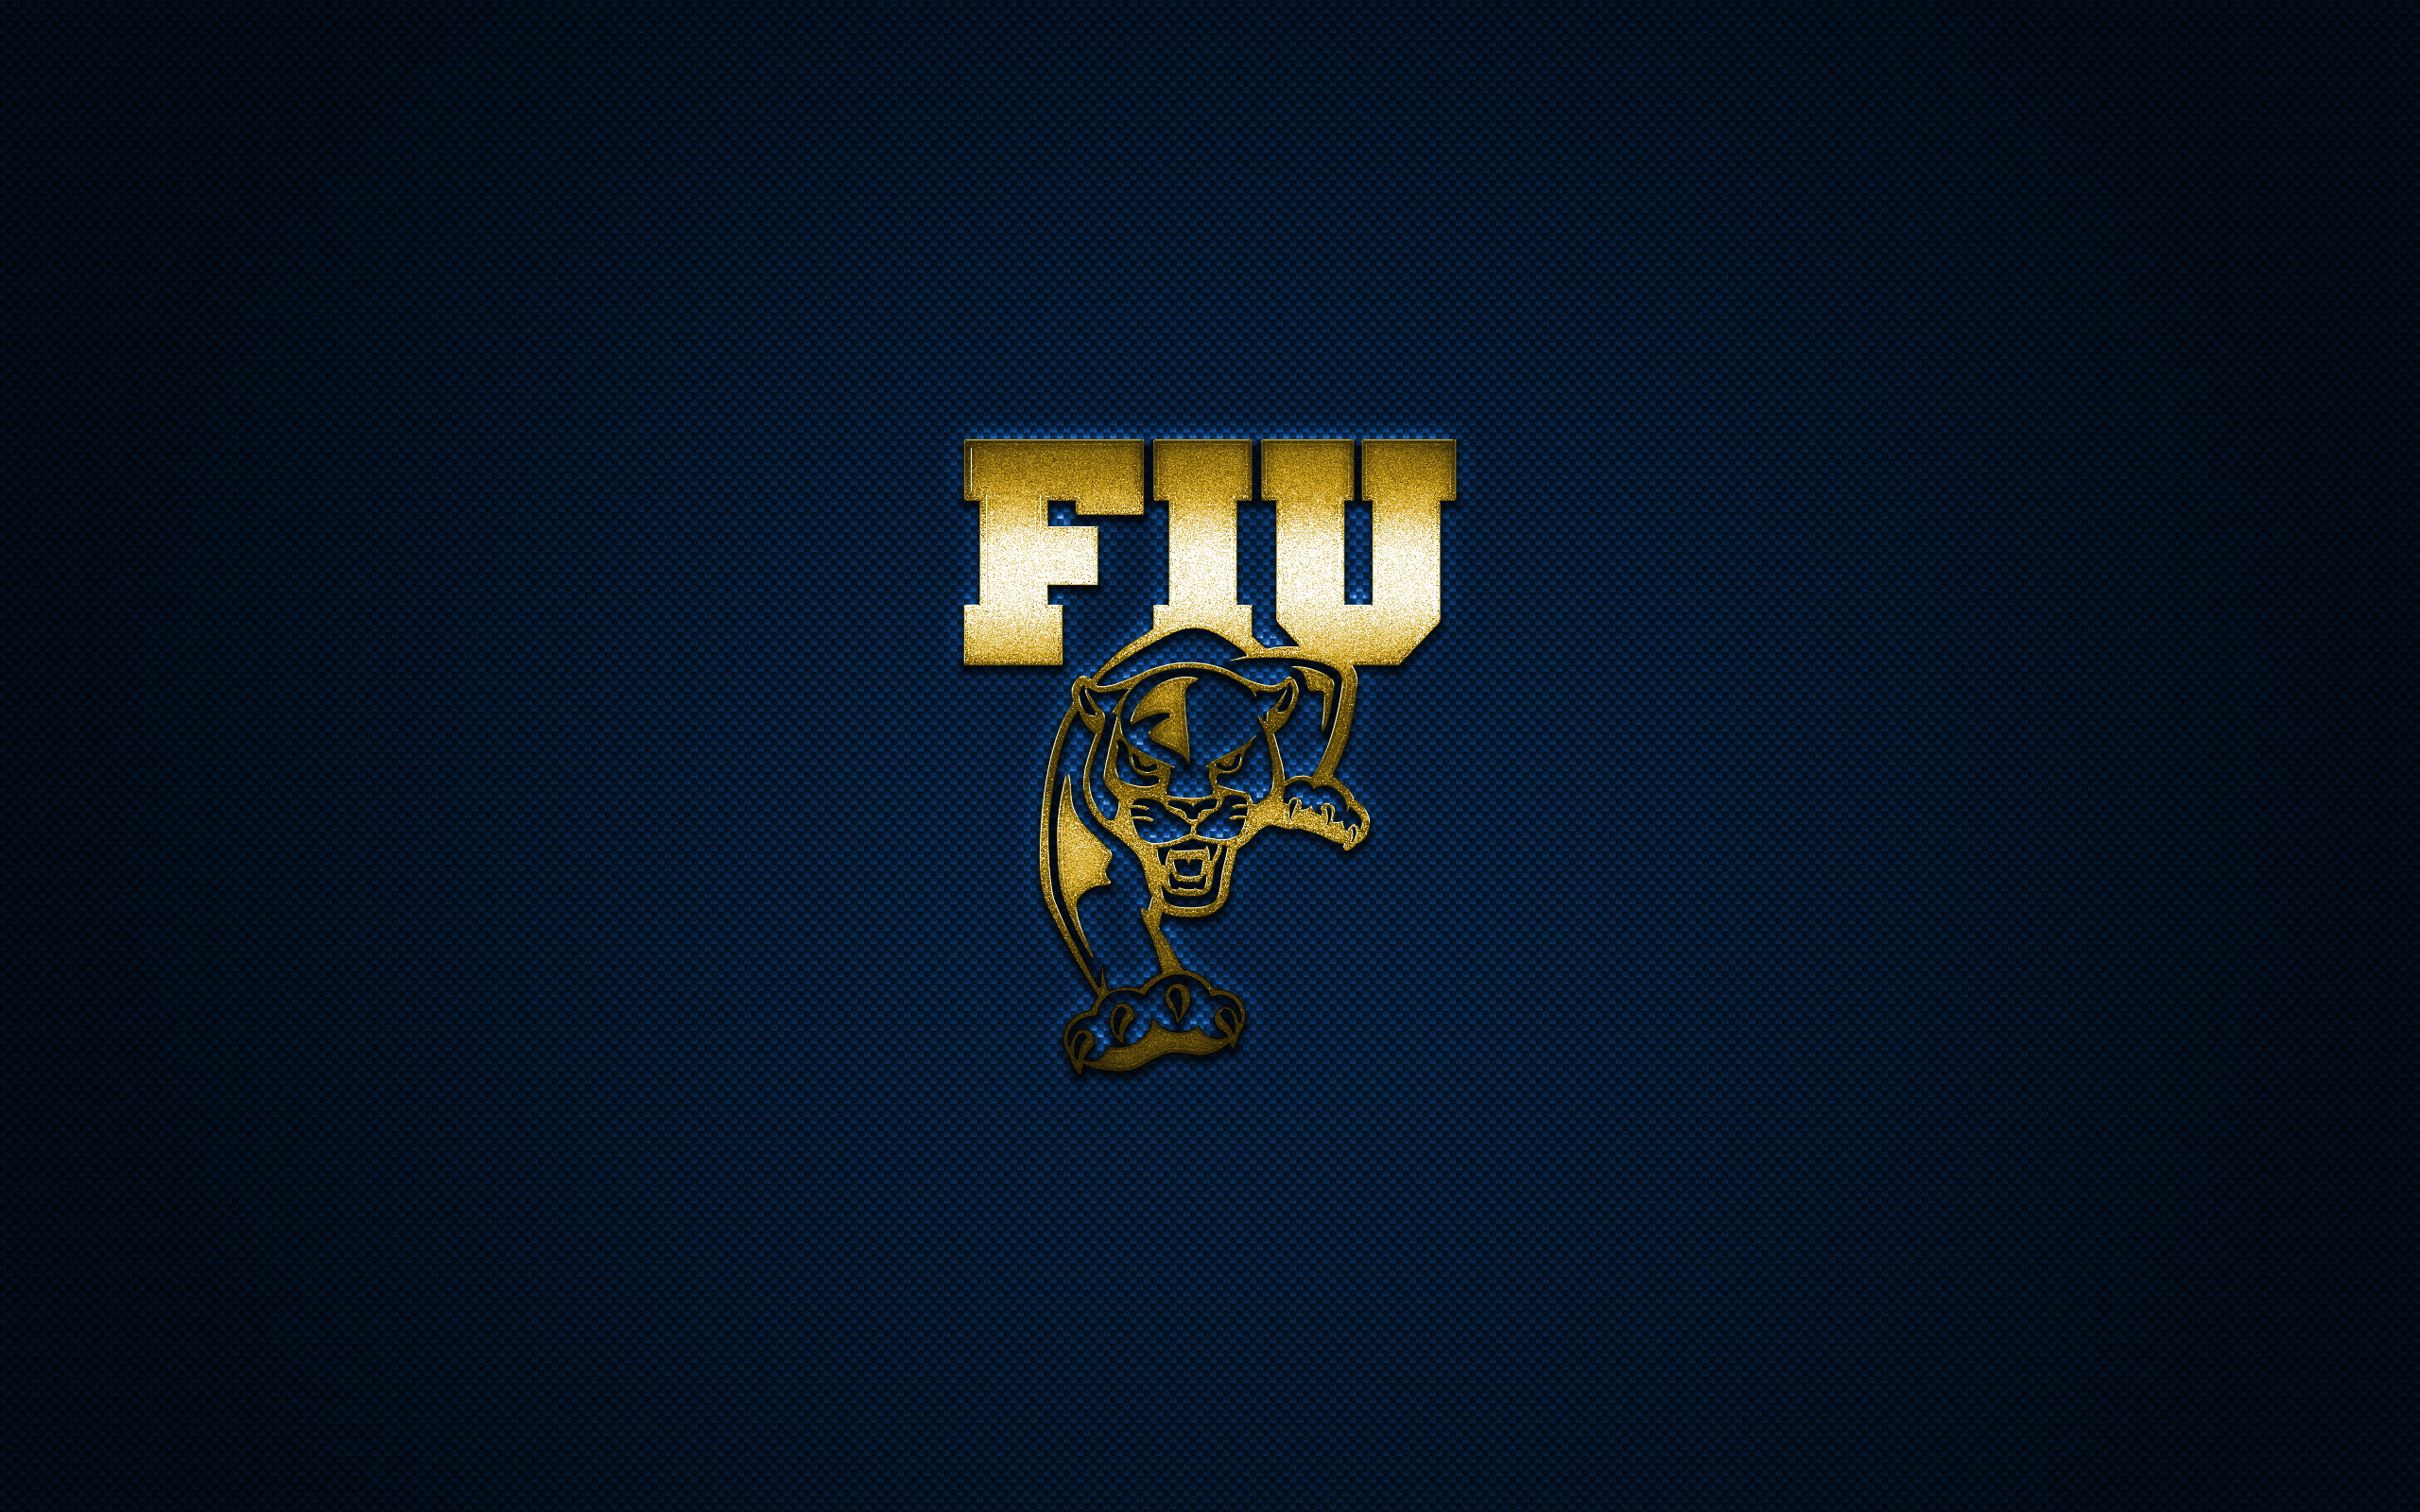 Download wallpaper FIU Panthers logo, American football club, NCAA, yellow logo, blue carbon fiber background, American football, Miami, Florida, USA, FIU Panthers for desktop with resolution 2560x1600. High Quality HD picture wallpaper